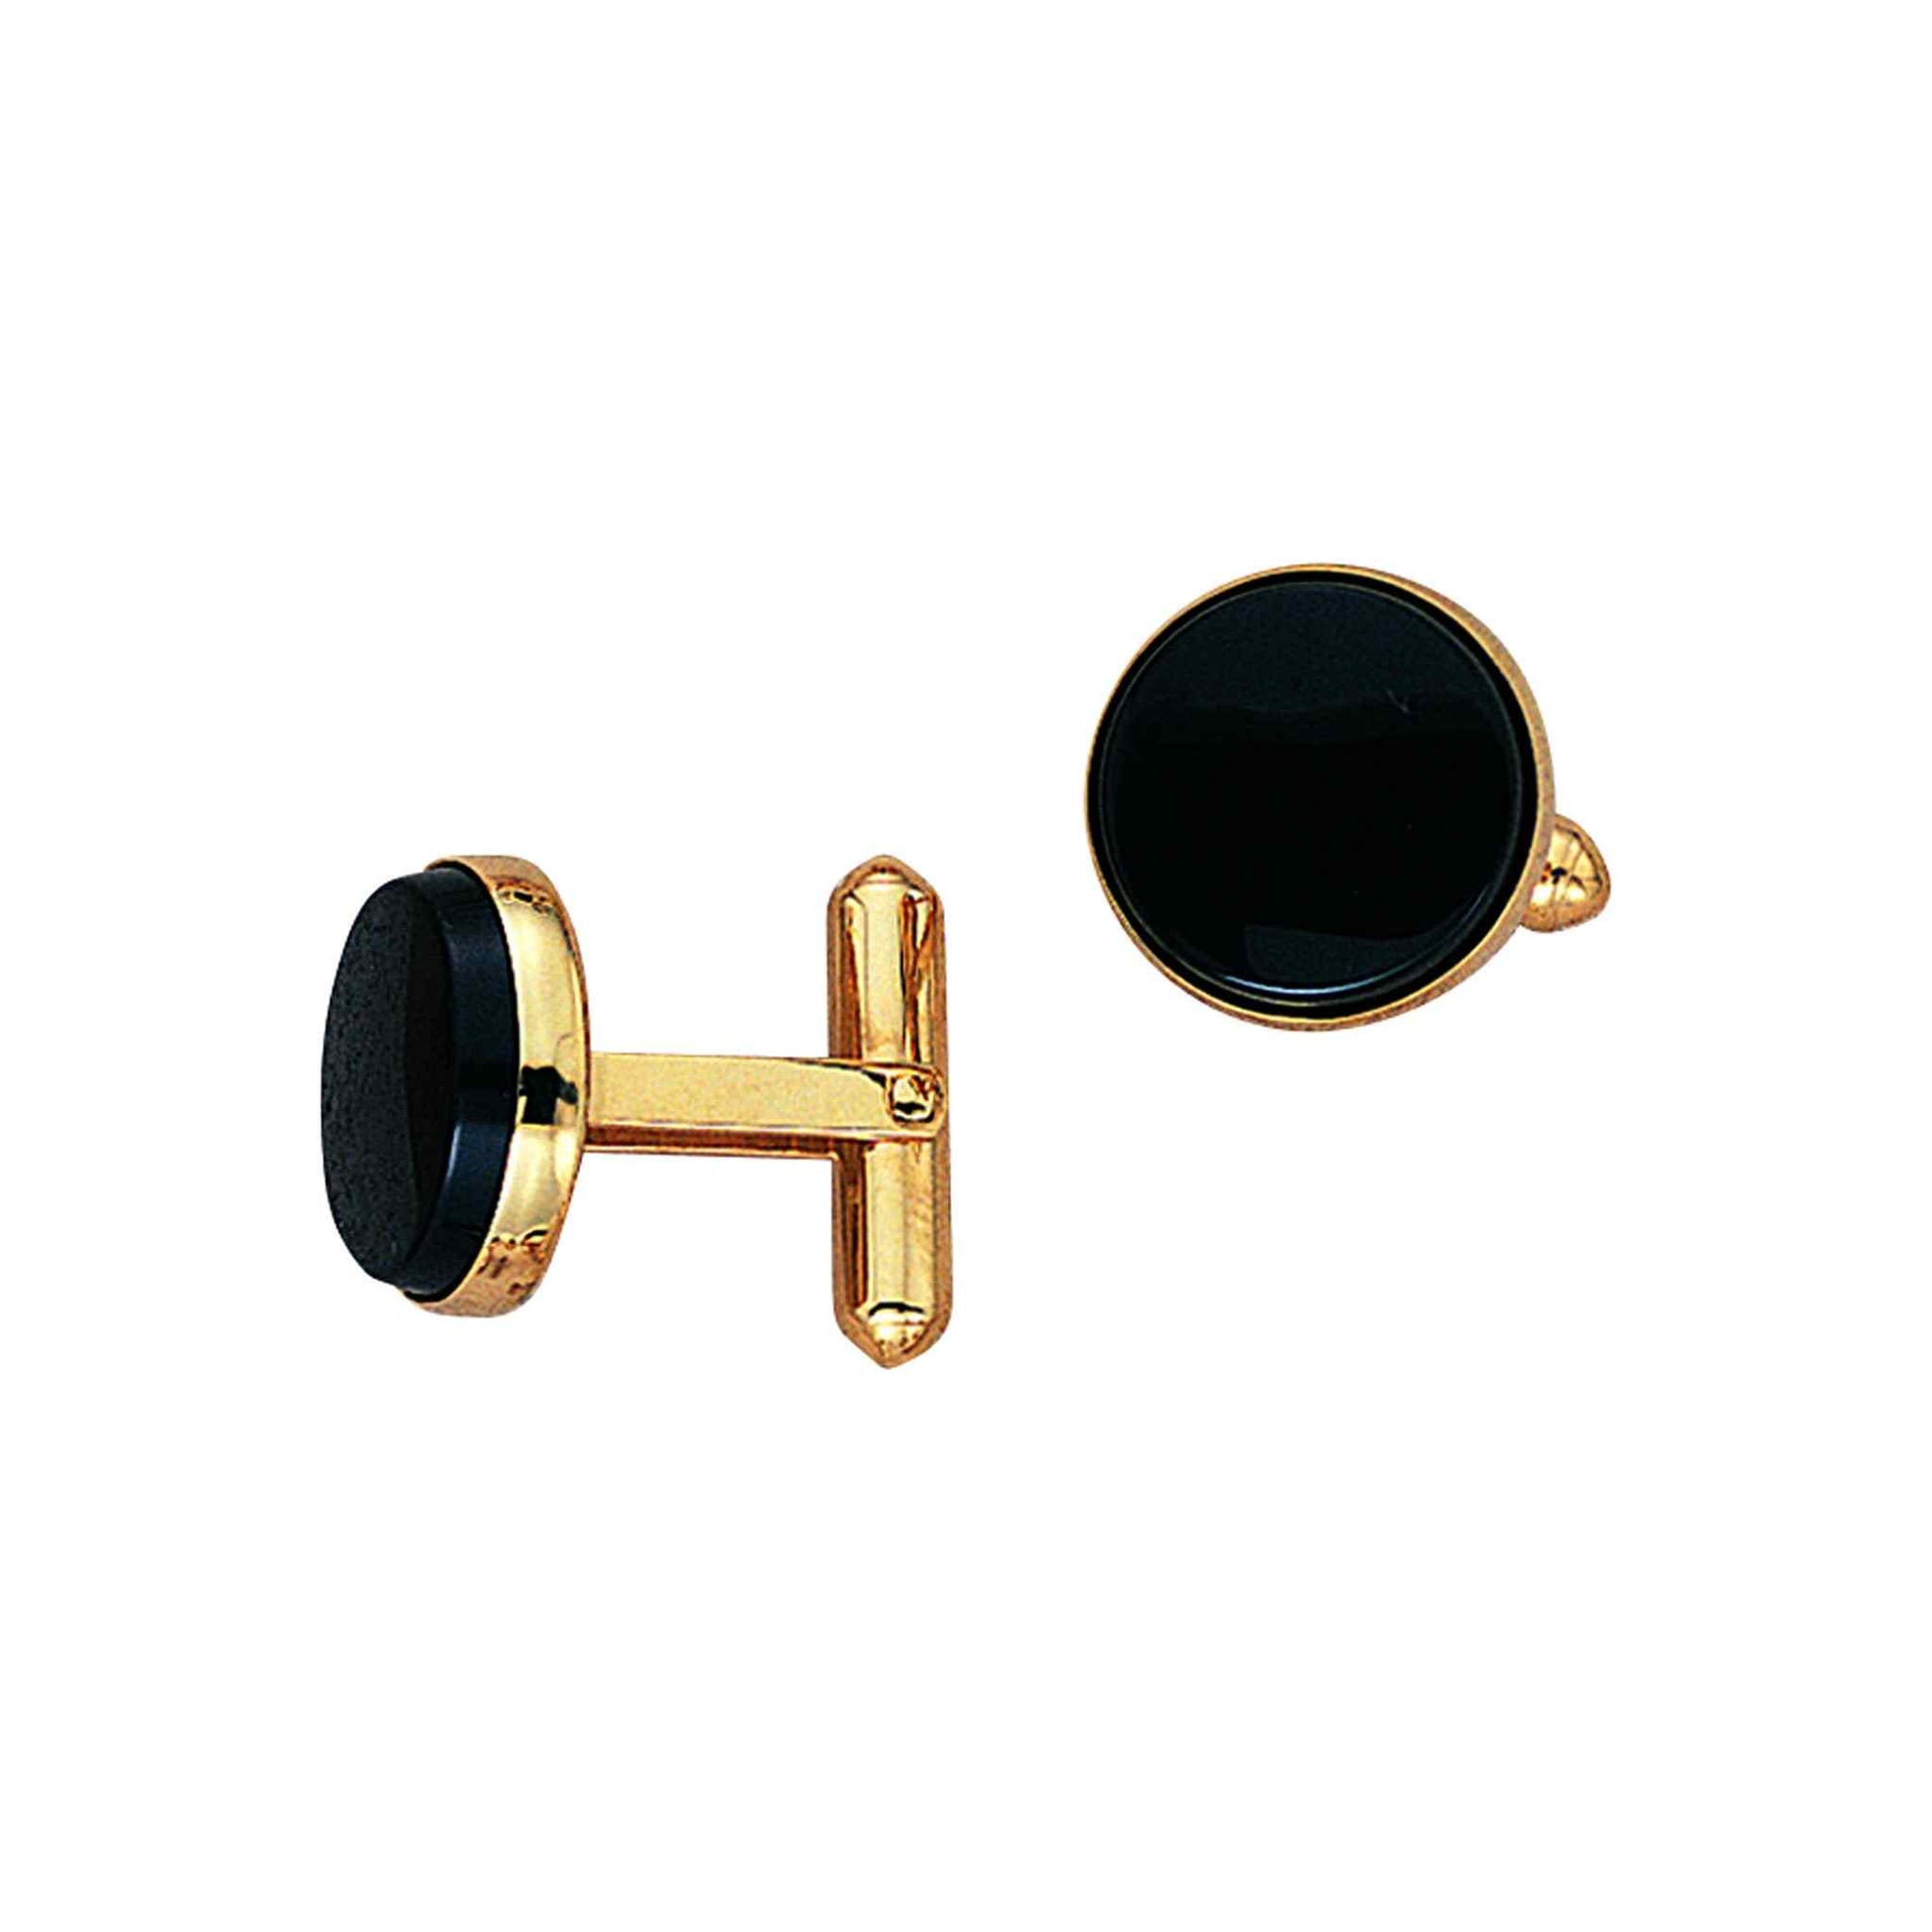 A 14k yellow gold round onyx cufflink displayed on a neutral white background.